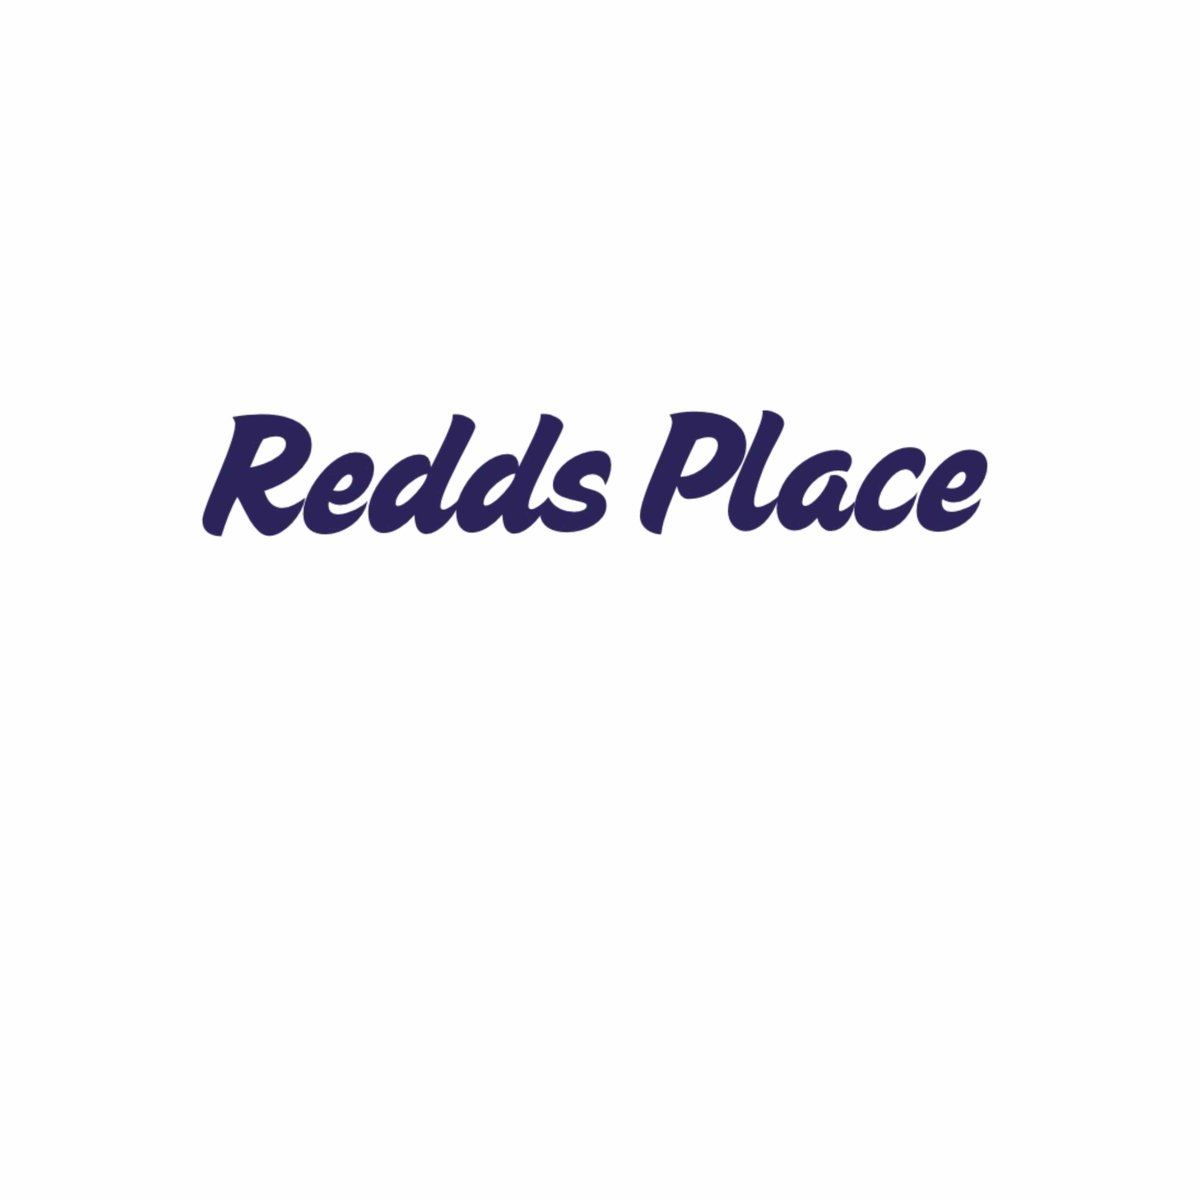 Redds: Is a short stay and assessment service named after another Bolton champion, suffragette, Sarah Reddish. She supported and campaigned for employment rights and to help the poor. Please see our website for more info! 🙏 #Charity #homelessness